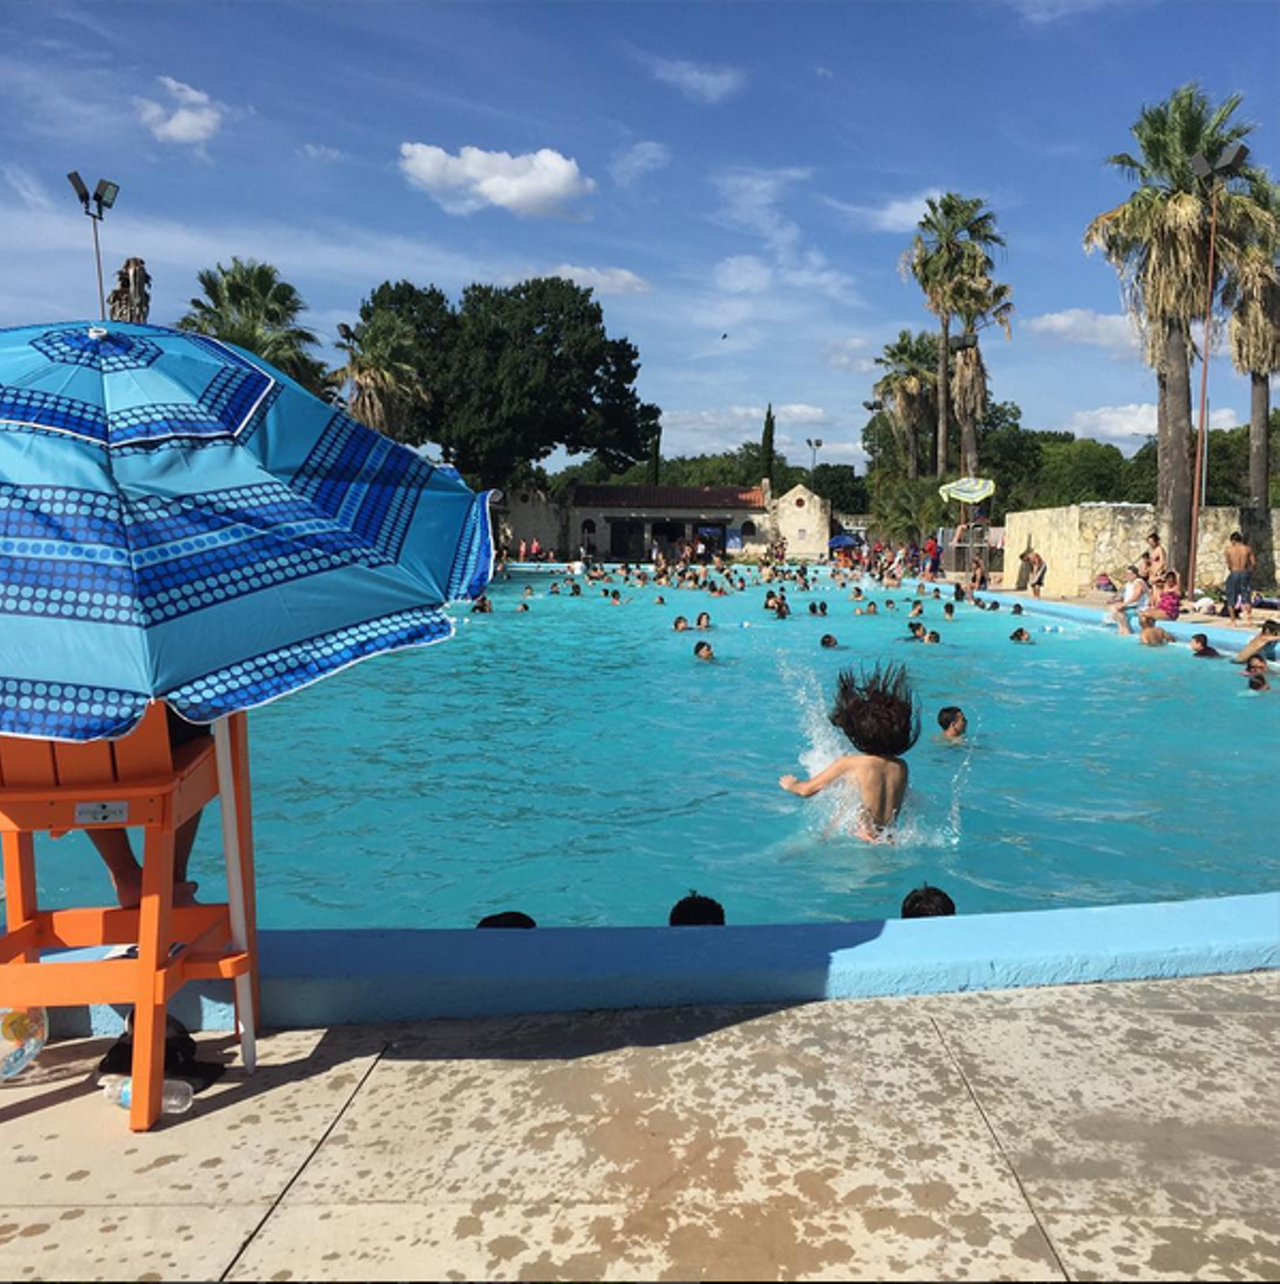 Woodlawn Pool
1103 Cincinnati Ave.I know the waters of Woodlawn Lake look enticing, but it's probably not a good idea to jump in. Instead, go for a dip in their large public pool. It's a worthy alternative. 
Instagram/nicolashes